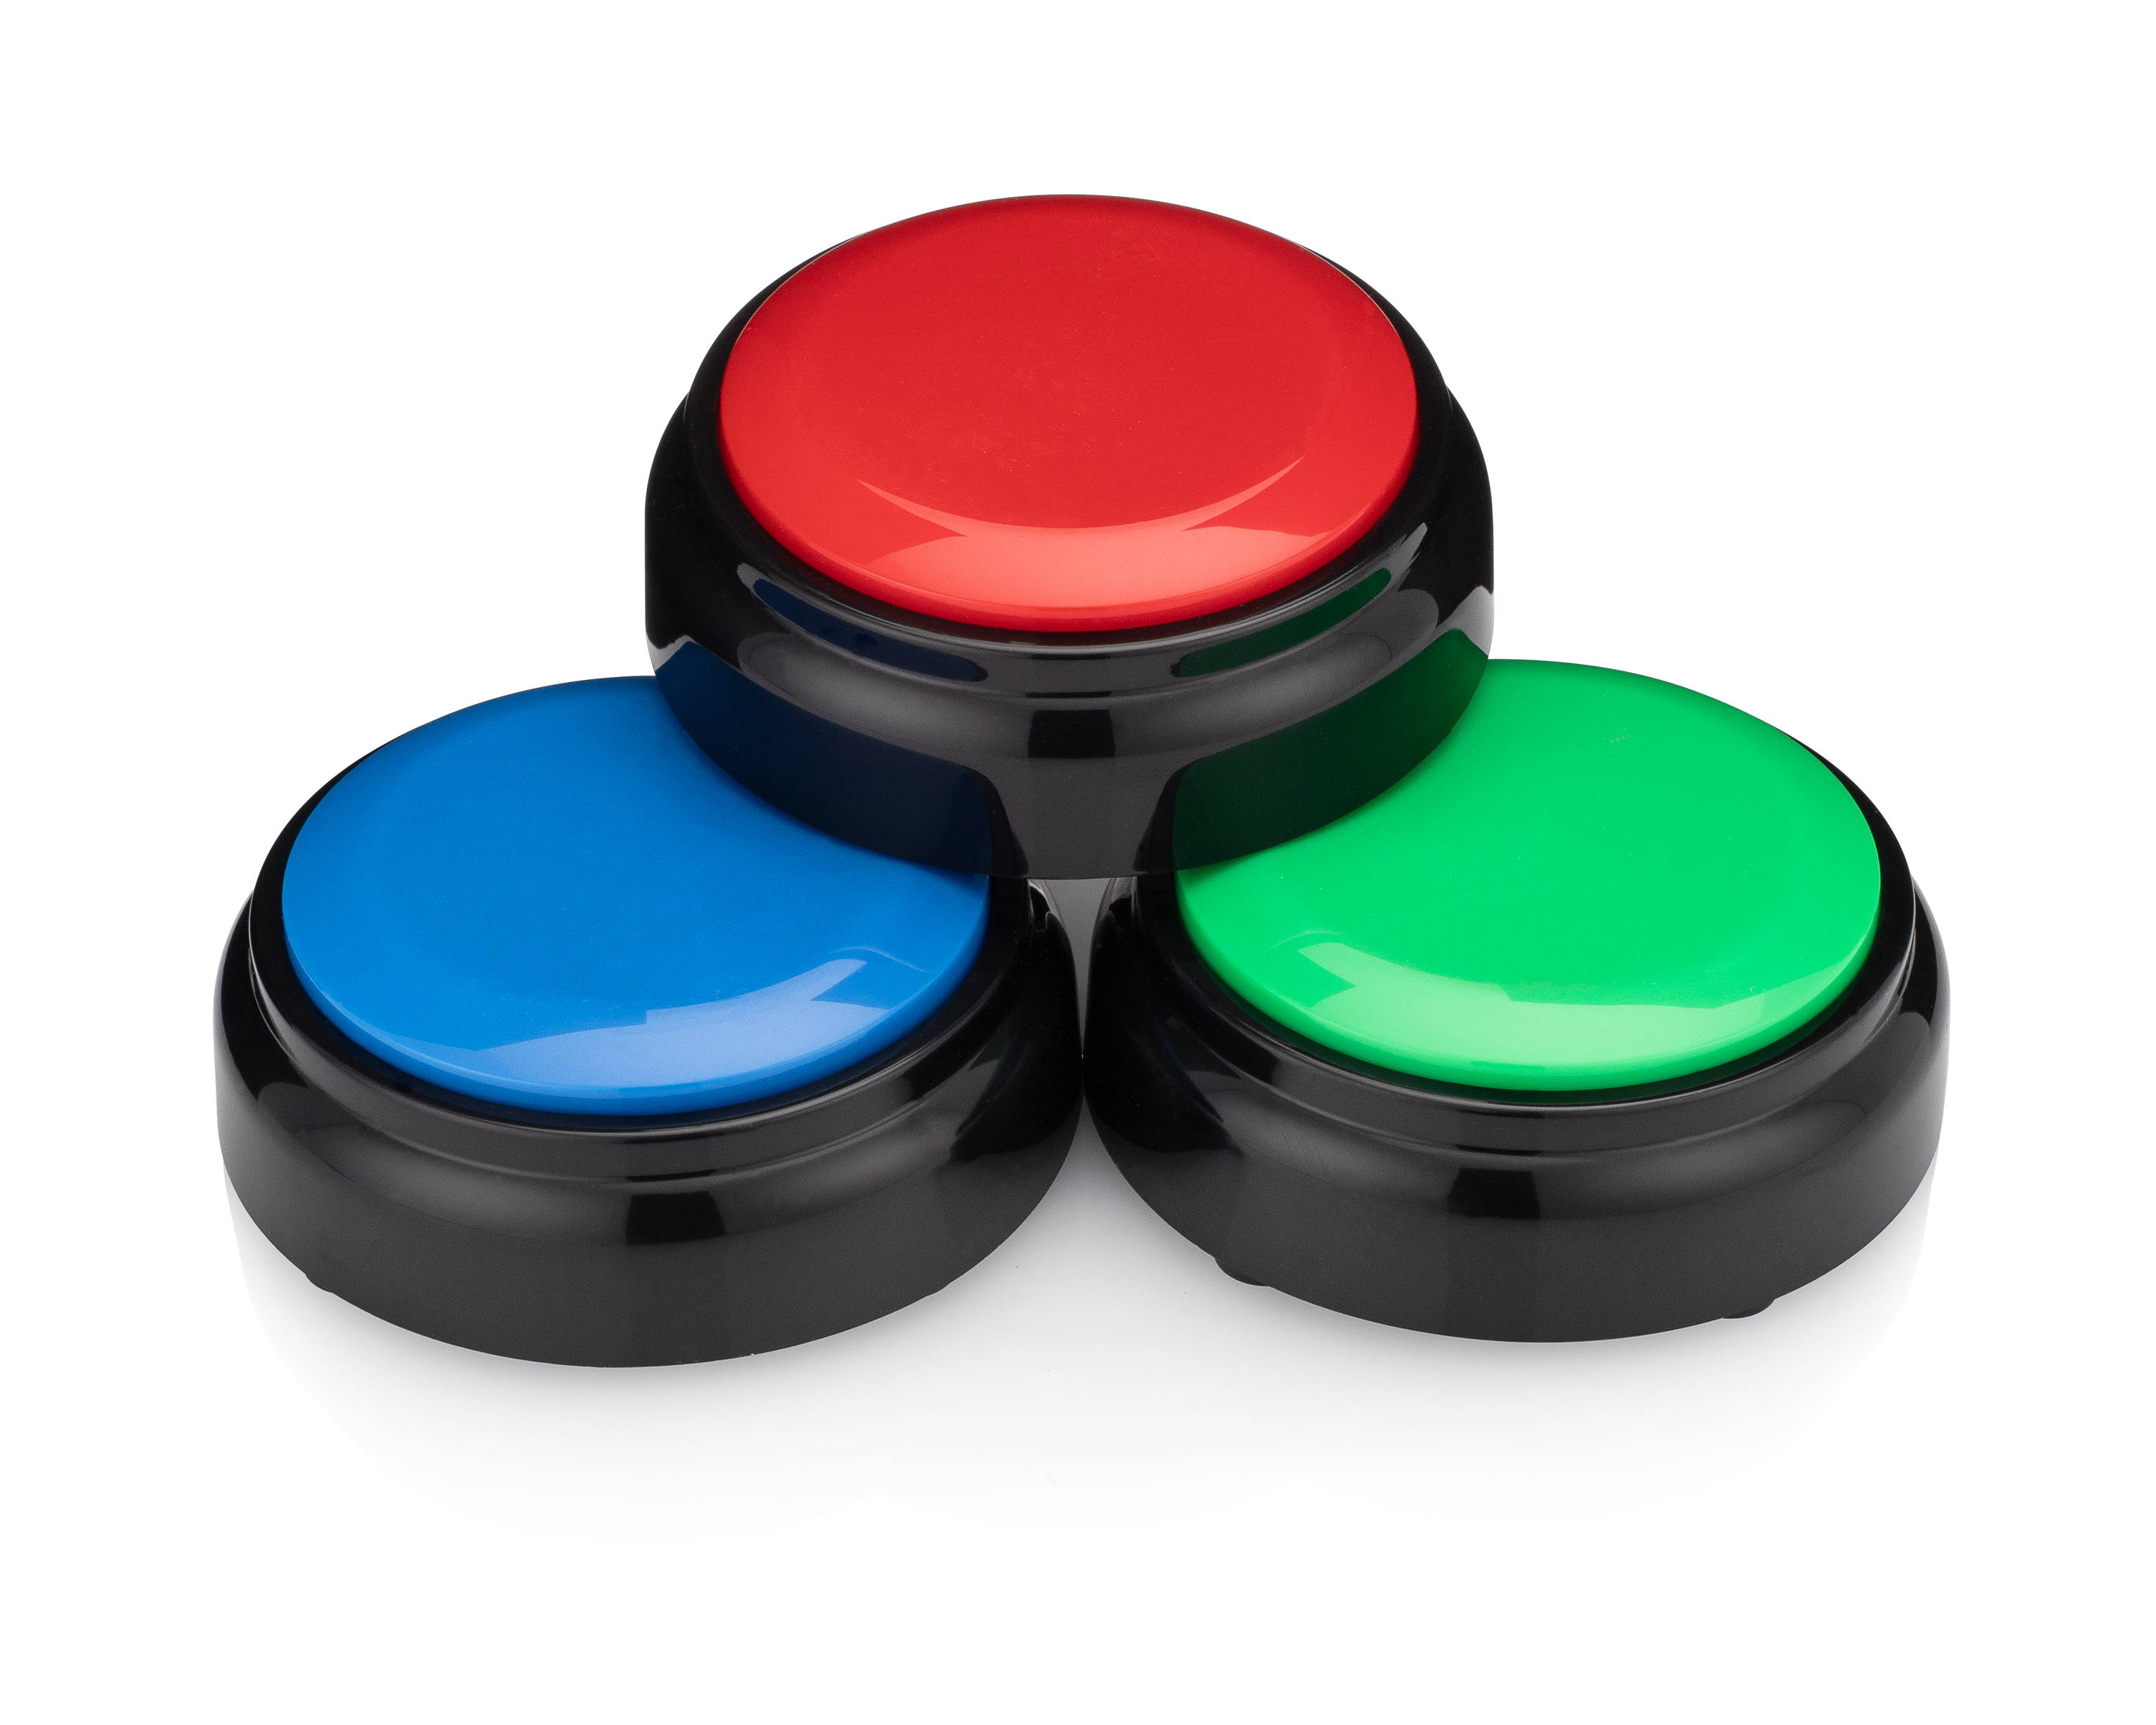  CUSTOM EASY BUTTON - Essential - The Talking Button That  Economically Record Your 10 Second Message!